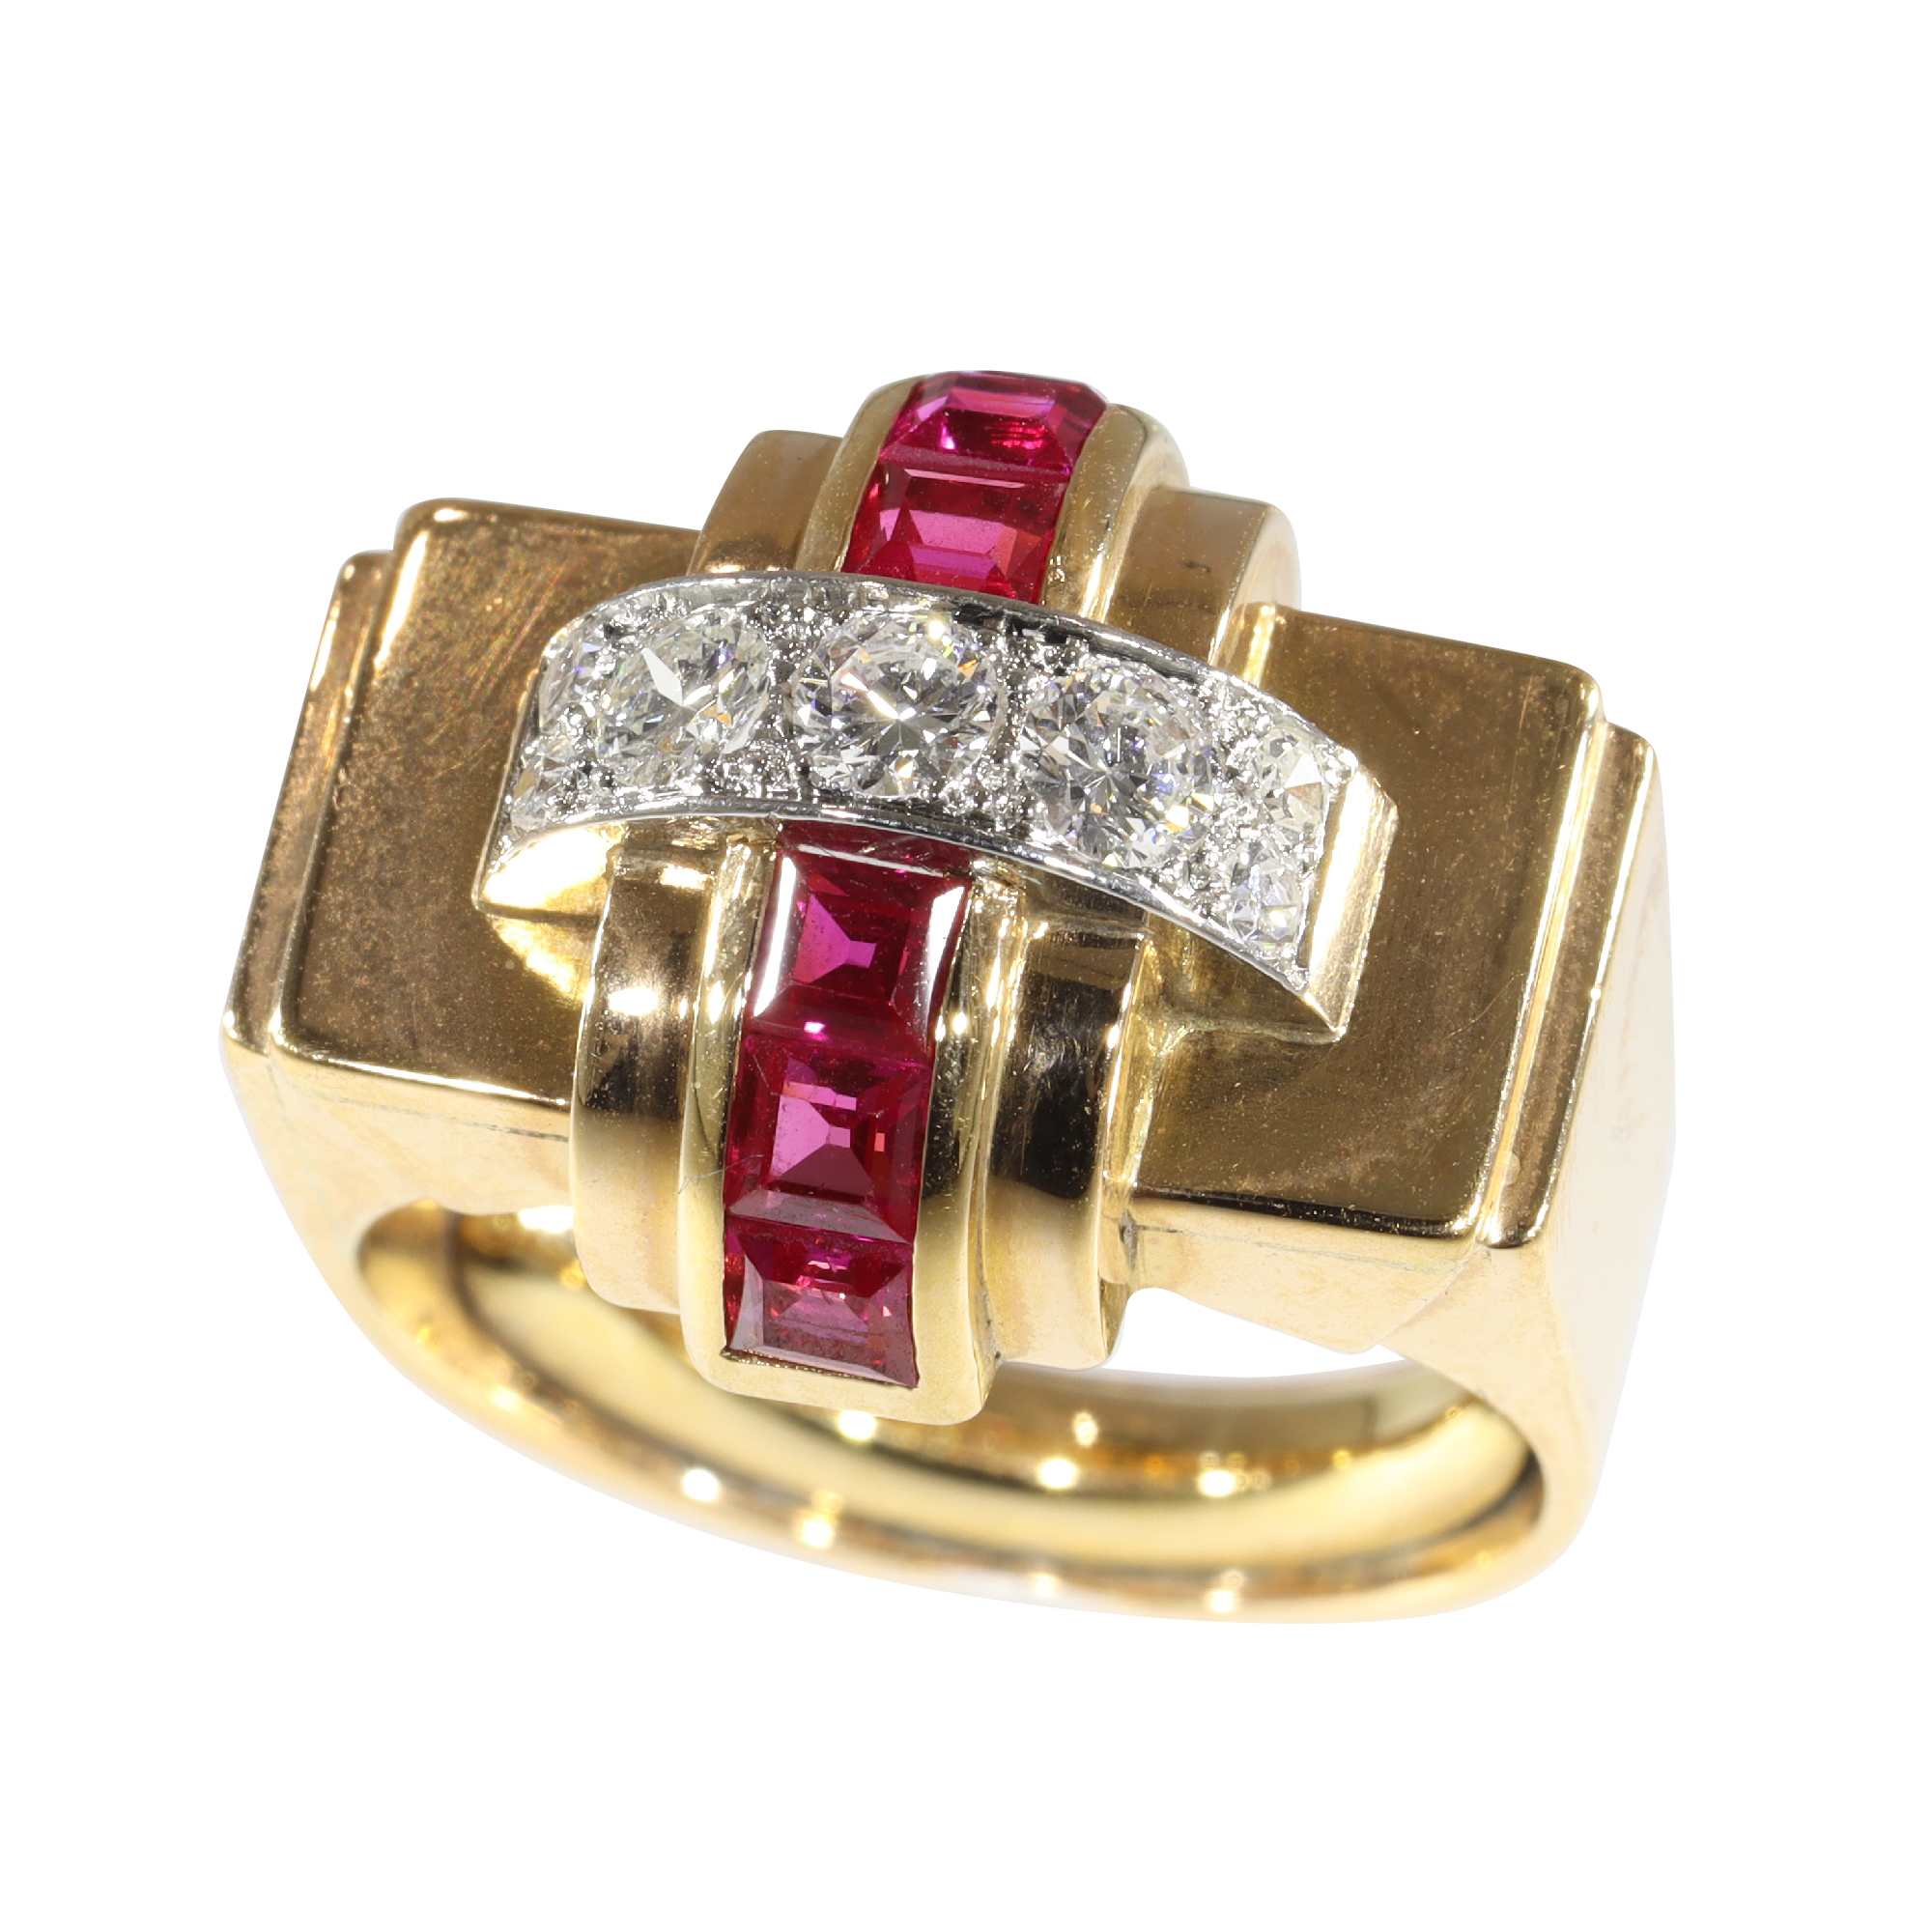 Stylish Retro red gold Cocktail ring with diamonds and rubies